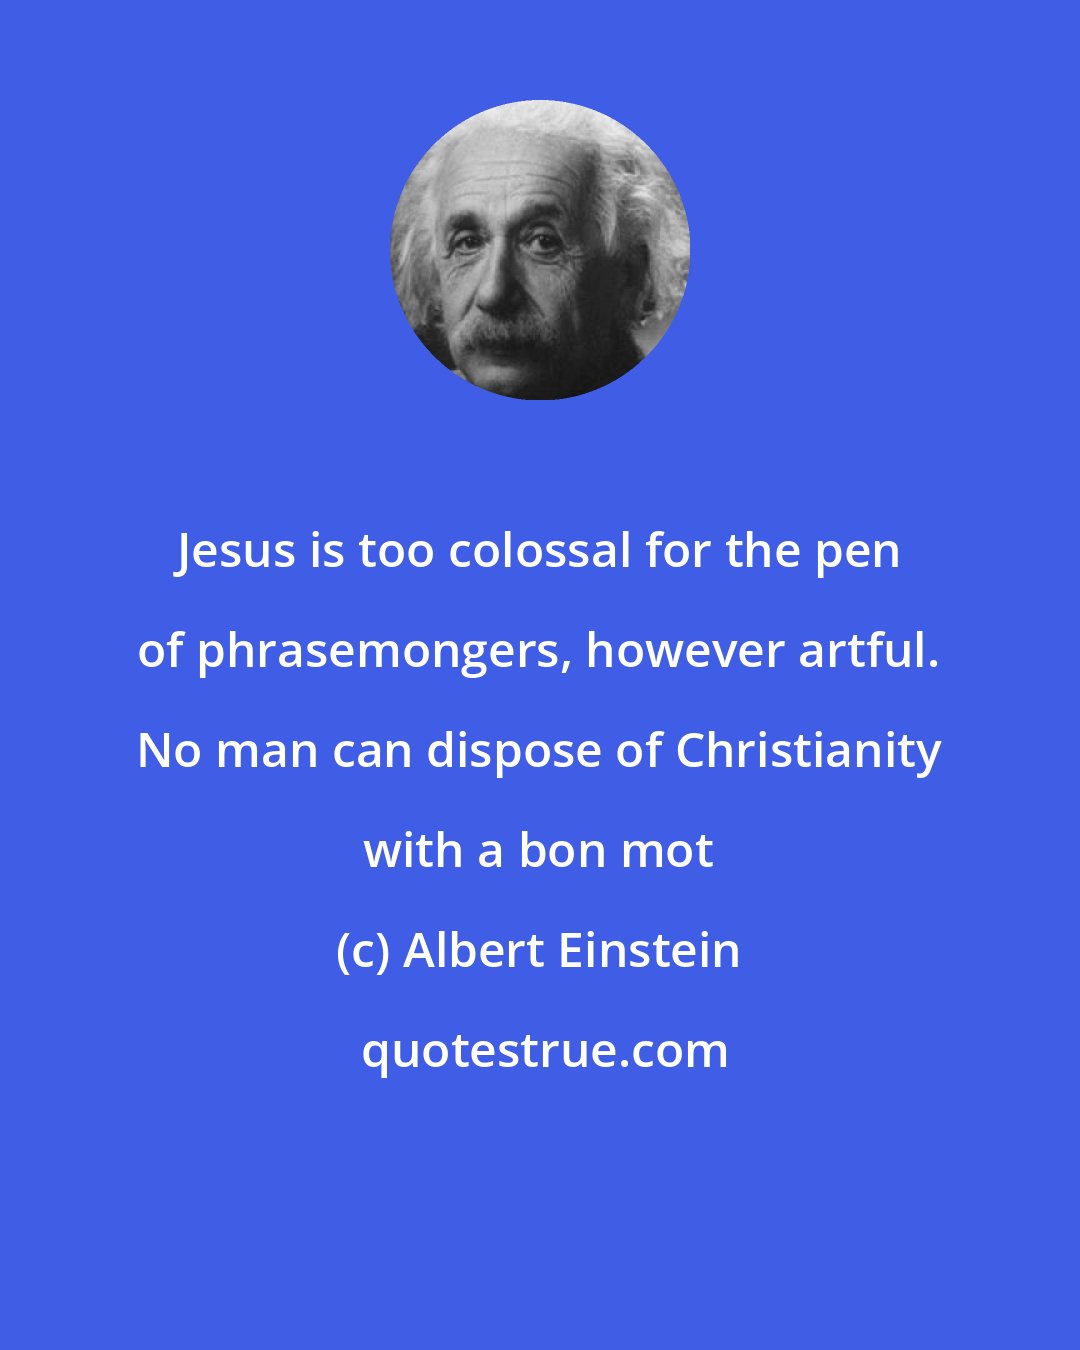 Albert Einstein: Jesus is too colossal for the pen of phrasemongers, however artful. No man can dispose of Christianity with a bon mot